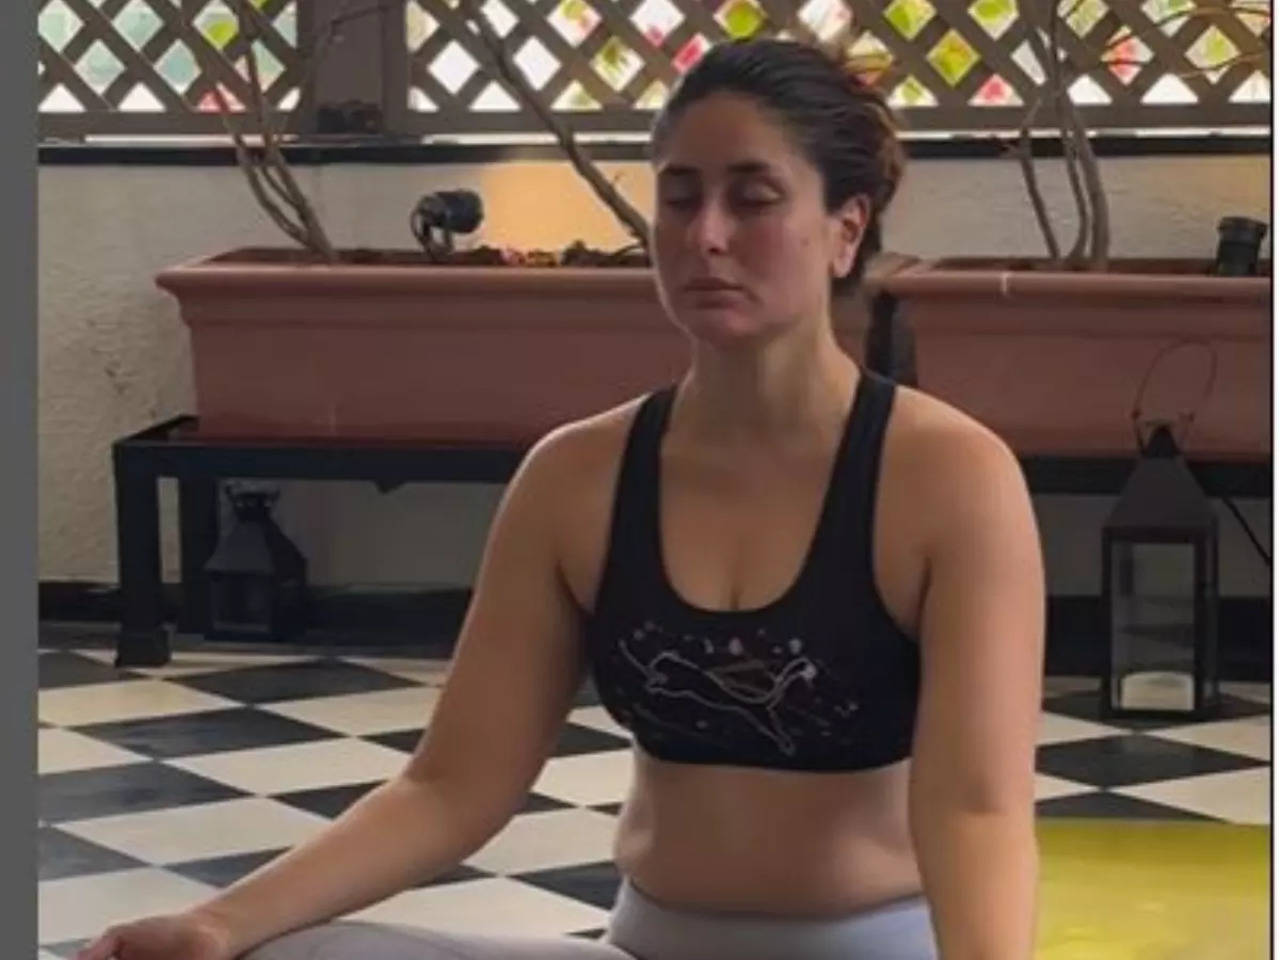 Kareenaxxvideo - Kareena Kapoor Khan shares her workout video, says she getting ready for  'The Crew' with Tabu and Kriti Sanon | Hindi Movie News - Times of India